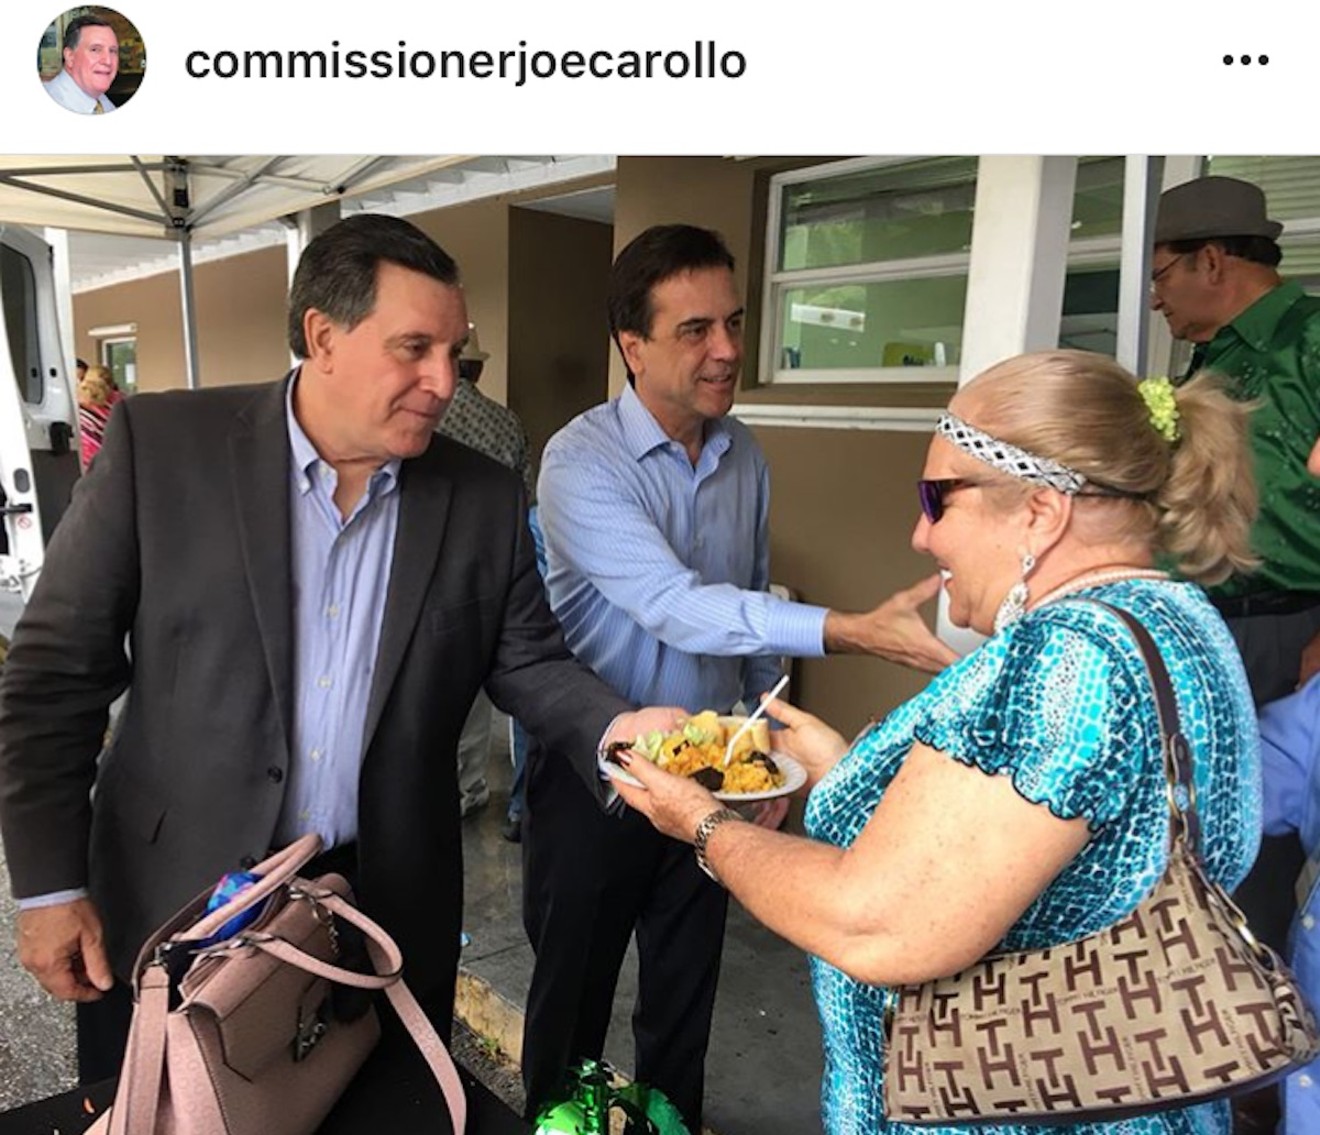 On May 19, Miami Commissioner Joe Carollo posted this Instagram photo showing him handing out paella alongside county commission candidate Alex Diaz de la Portilla.